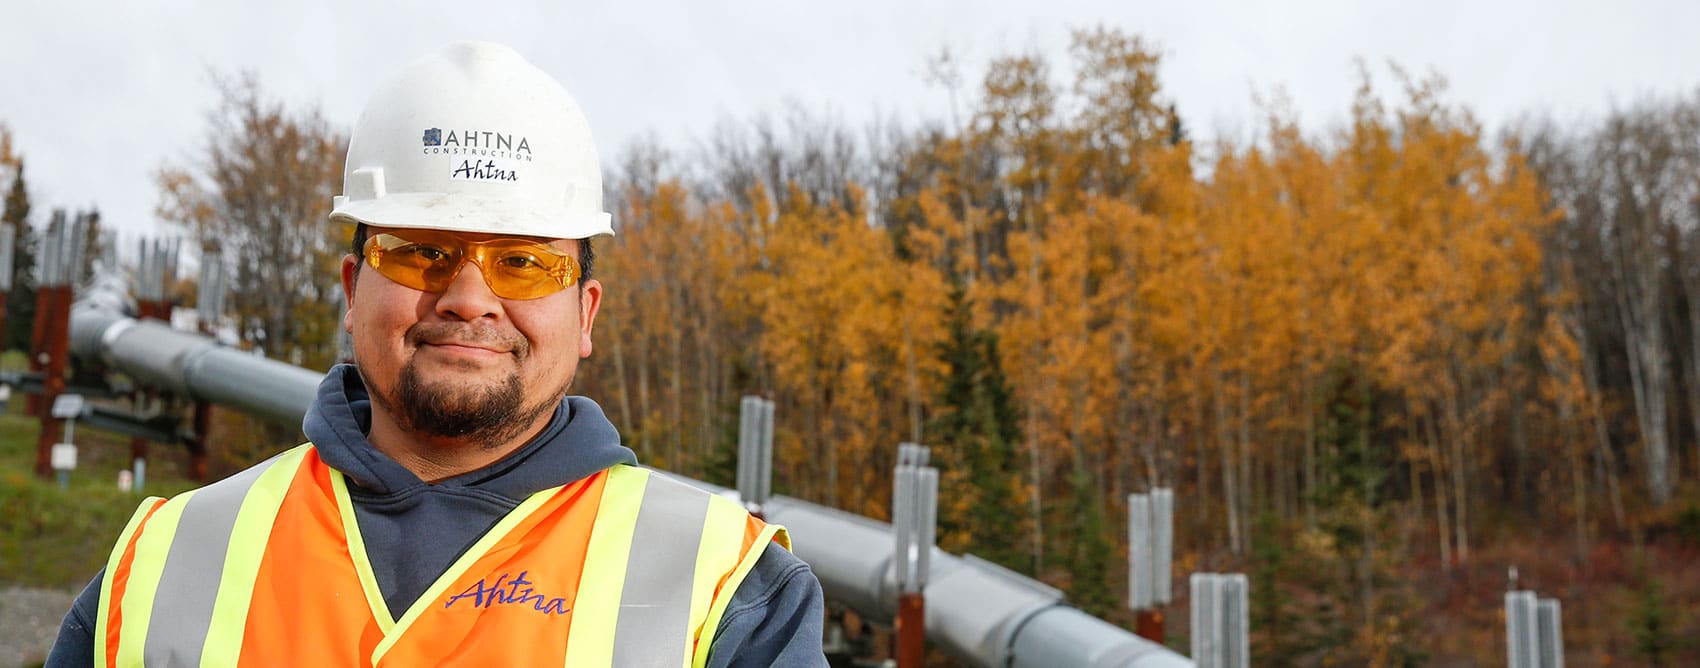 Ahtna worker in front of the Trans Alaska Pipeline.